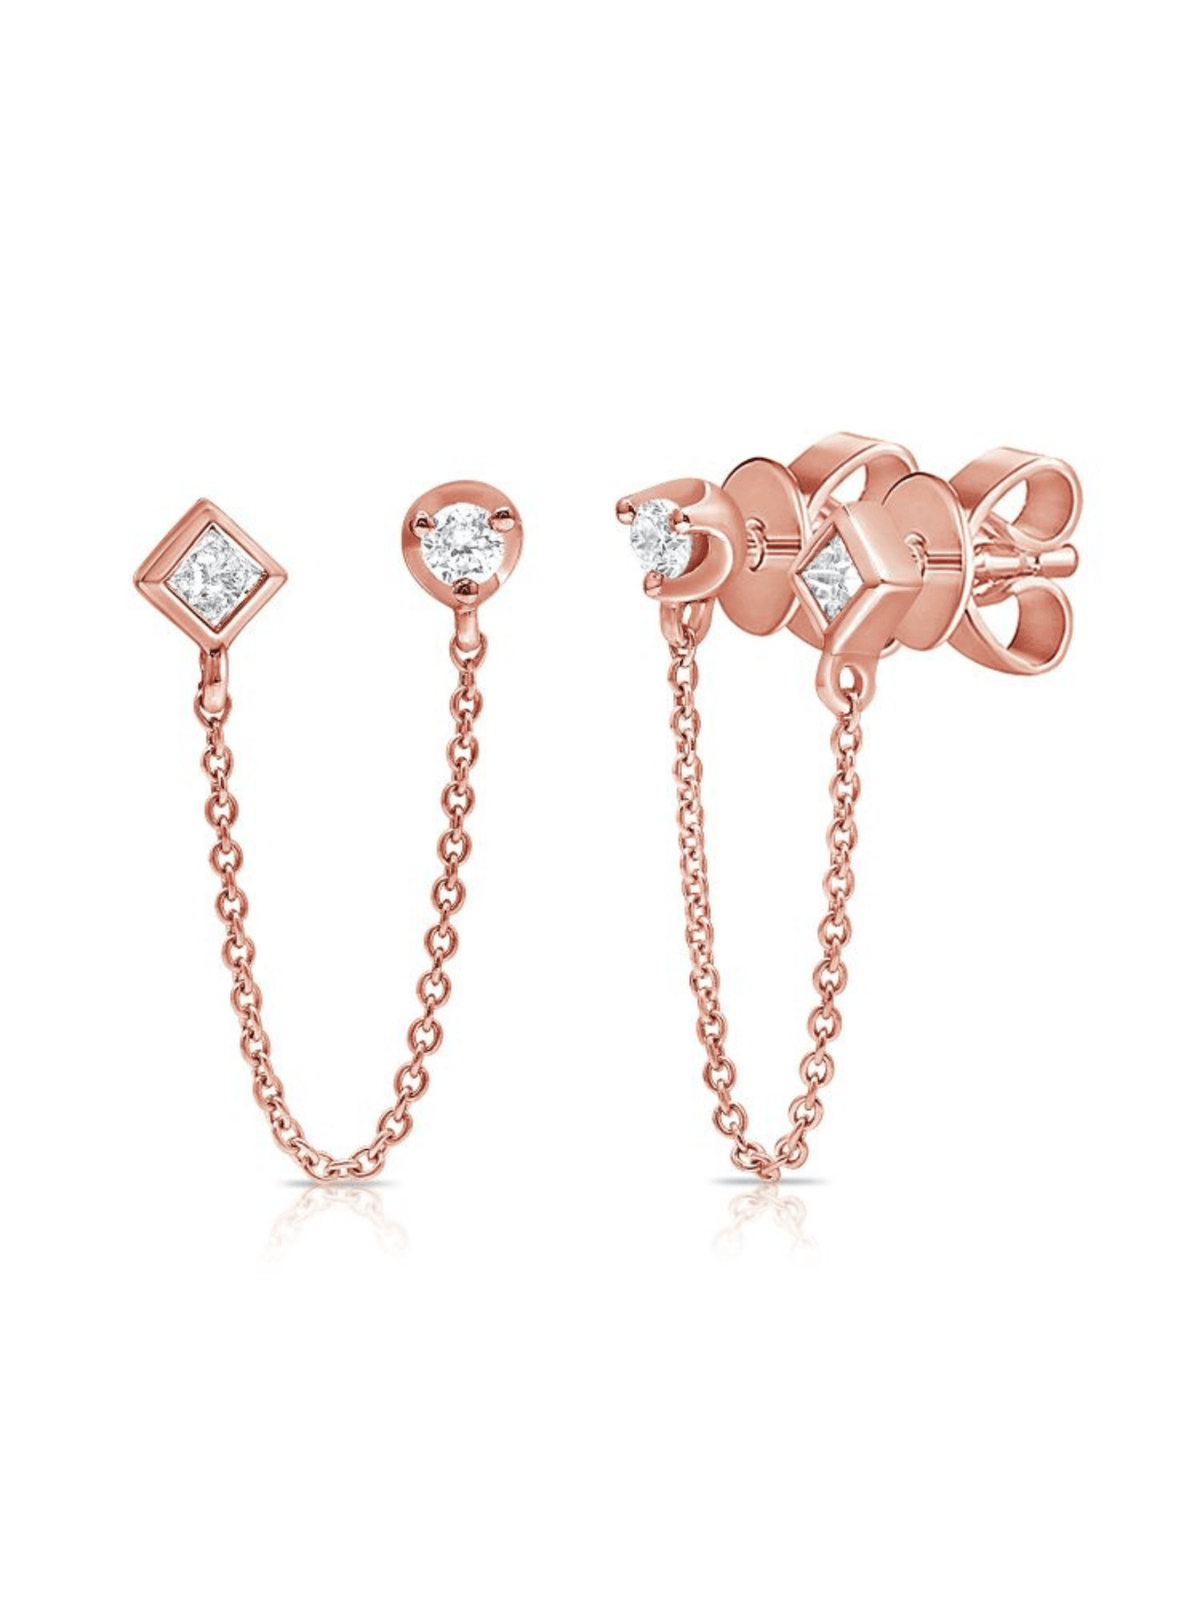 Double piercing earrings rose gold and diamond stud on white background